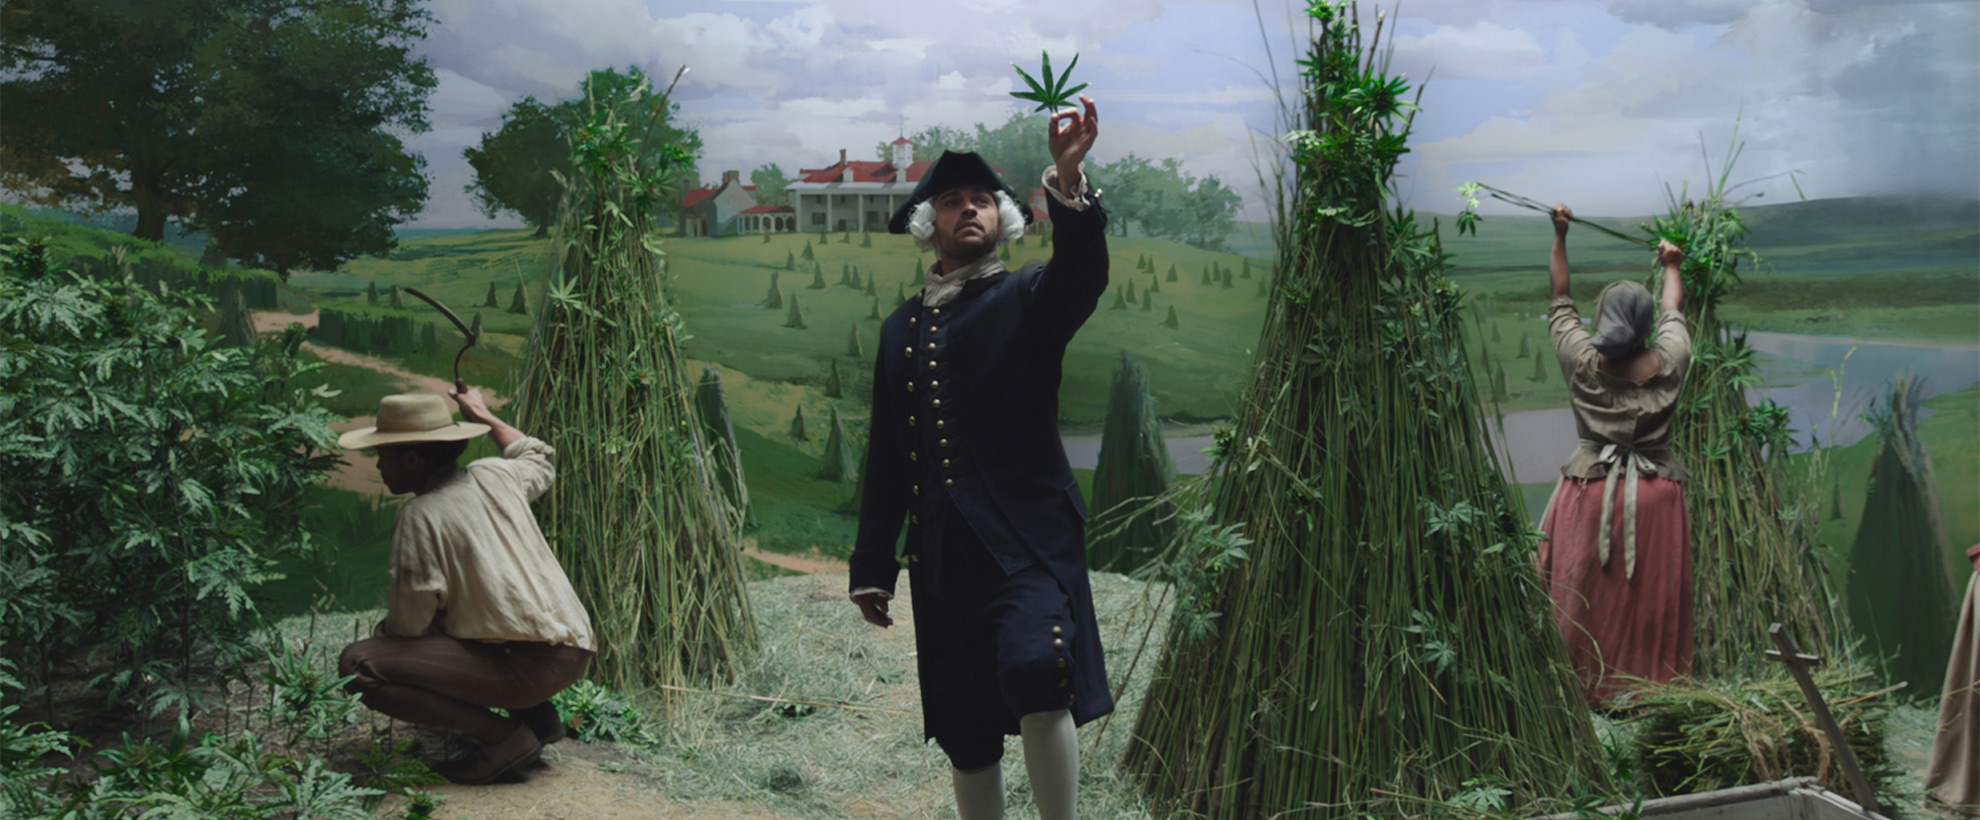 A man in period clothing holding a plant whilst others tend to tall green plants